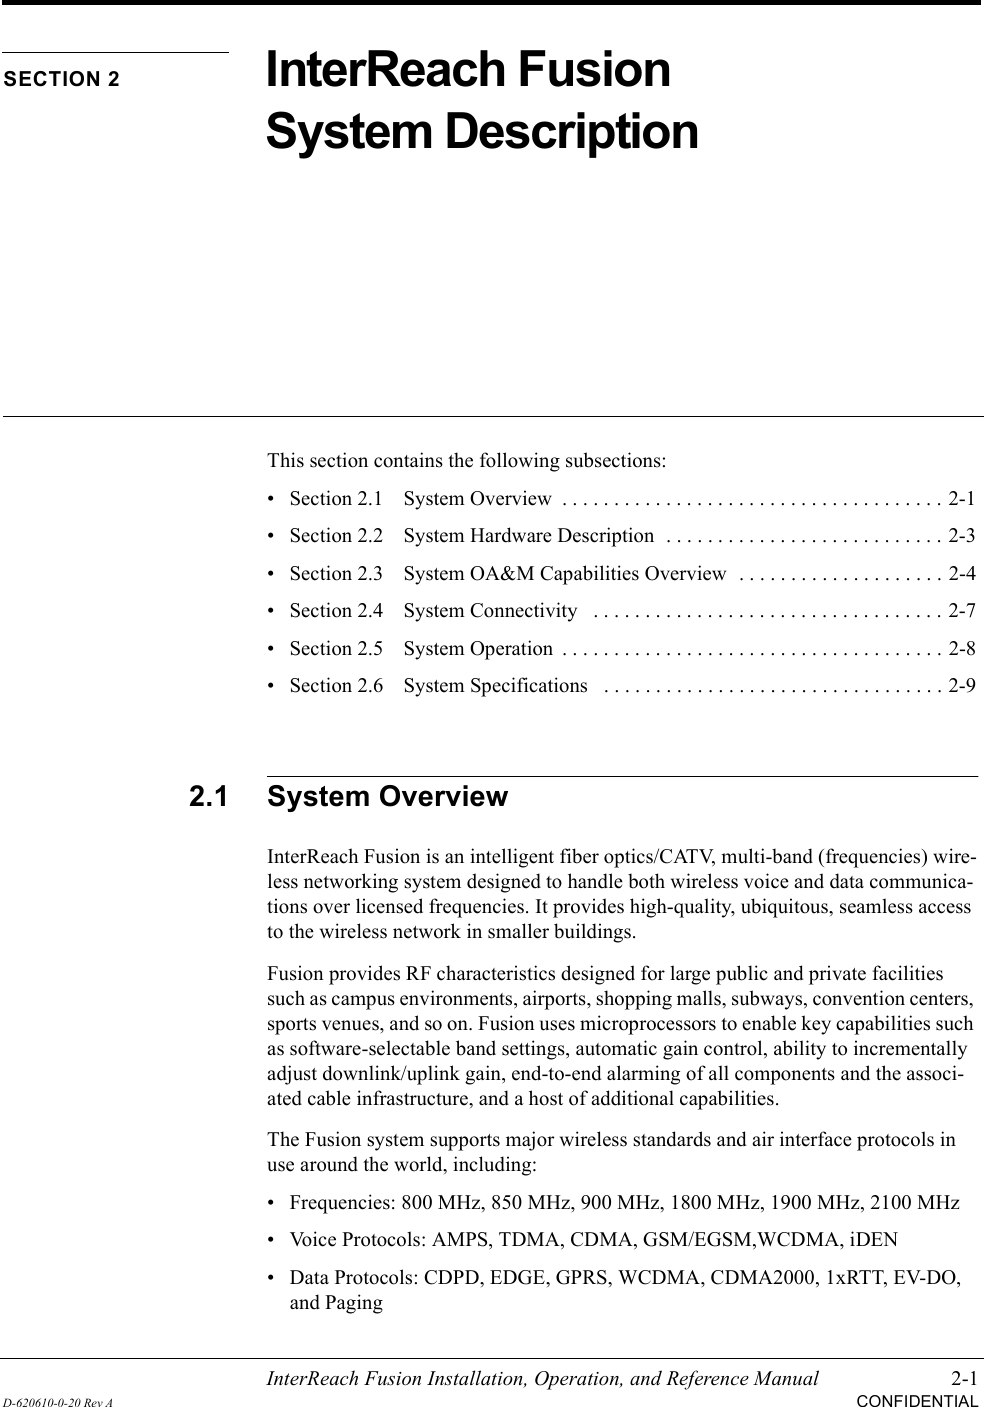 InterReach Fusion Installation, Operation, and Reference Manual 2-1D-620610-0-20 Rev ACONFIDENTIALSECTION 2InterReach Fusion System DescriptionThis section contains the following subsections:• Section 2.1   System Overview  . . . . . . . . . . . . . . . . . . . . . . . . . . . . . . . . . . . . . 2-1• Section 2.2   System Hardware Description  . . . . . . . . . . . . . . . . . . . . . . . . . . . 2-3• Section 2.3   System OA&amp;M Capabilities Overview  . . . . . . . . . . . . . . . . . . . . 2-4• Section 2.4   System Connectivity   . . . . . . . . . . . . . . . . . . . . . . . . . . . . . . . . . . 2-7• Section 2.5   System Operation  . . . . . . . . . . . . . . . . . . . . . . . . . . . . . . . . . . . . . 2-8• Section 2.6   System Specifications   . . . . . . . . . . . . . . . . . . . . . . . . . . . . . . . . . 2-92.1 System OverviewInterReach Fusion is an intelligent fiber optics/CATV, multi-band (frequencies) wire-less networking system designed to handle both wireless voice and data communica-tions over licensed frequencies. It provides high-quality, ubiquitous, seamless access to the wireless network in smaller buildings.Fusion provides RF characteristics designed for large public and private facilities such as campus environments, airports, shopping malls, subways, convention centers, sports venues, and so on. Fusion uses microprocessors to enable key capabilities such as software-selectable band settings, automatic gain control, ability to incrementally adjust downlink/uplink gain, end-to-end alarming of all components and the associ-ated cable infrastructure, and a host of additional capabilities.The Fusion system supports major wireless standards and air interface protocols in use around the world, including:• Frequencies: 800 MHz, 850 MHz, 900 MHz, 1800 MHz, 1900 MHz, 2100 MHz• Voice Protocols: AMPS, TDMA, CDMA, GSM/EGSM,WCDMA, iDEN• Data Protocols: CDPD, EDGE, GPRS, WCDMA, CDMA2000, 1xRTT, EV-DO, and Paging